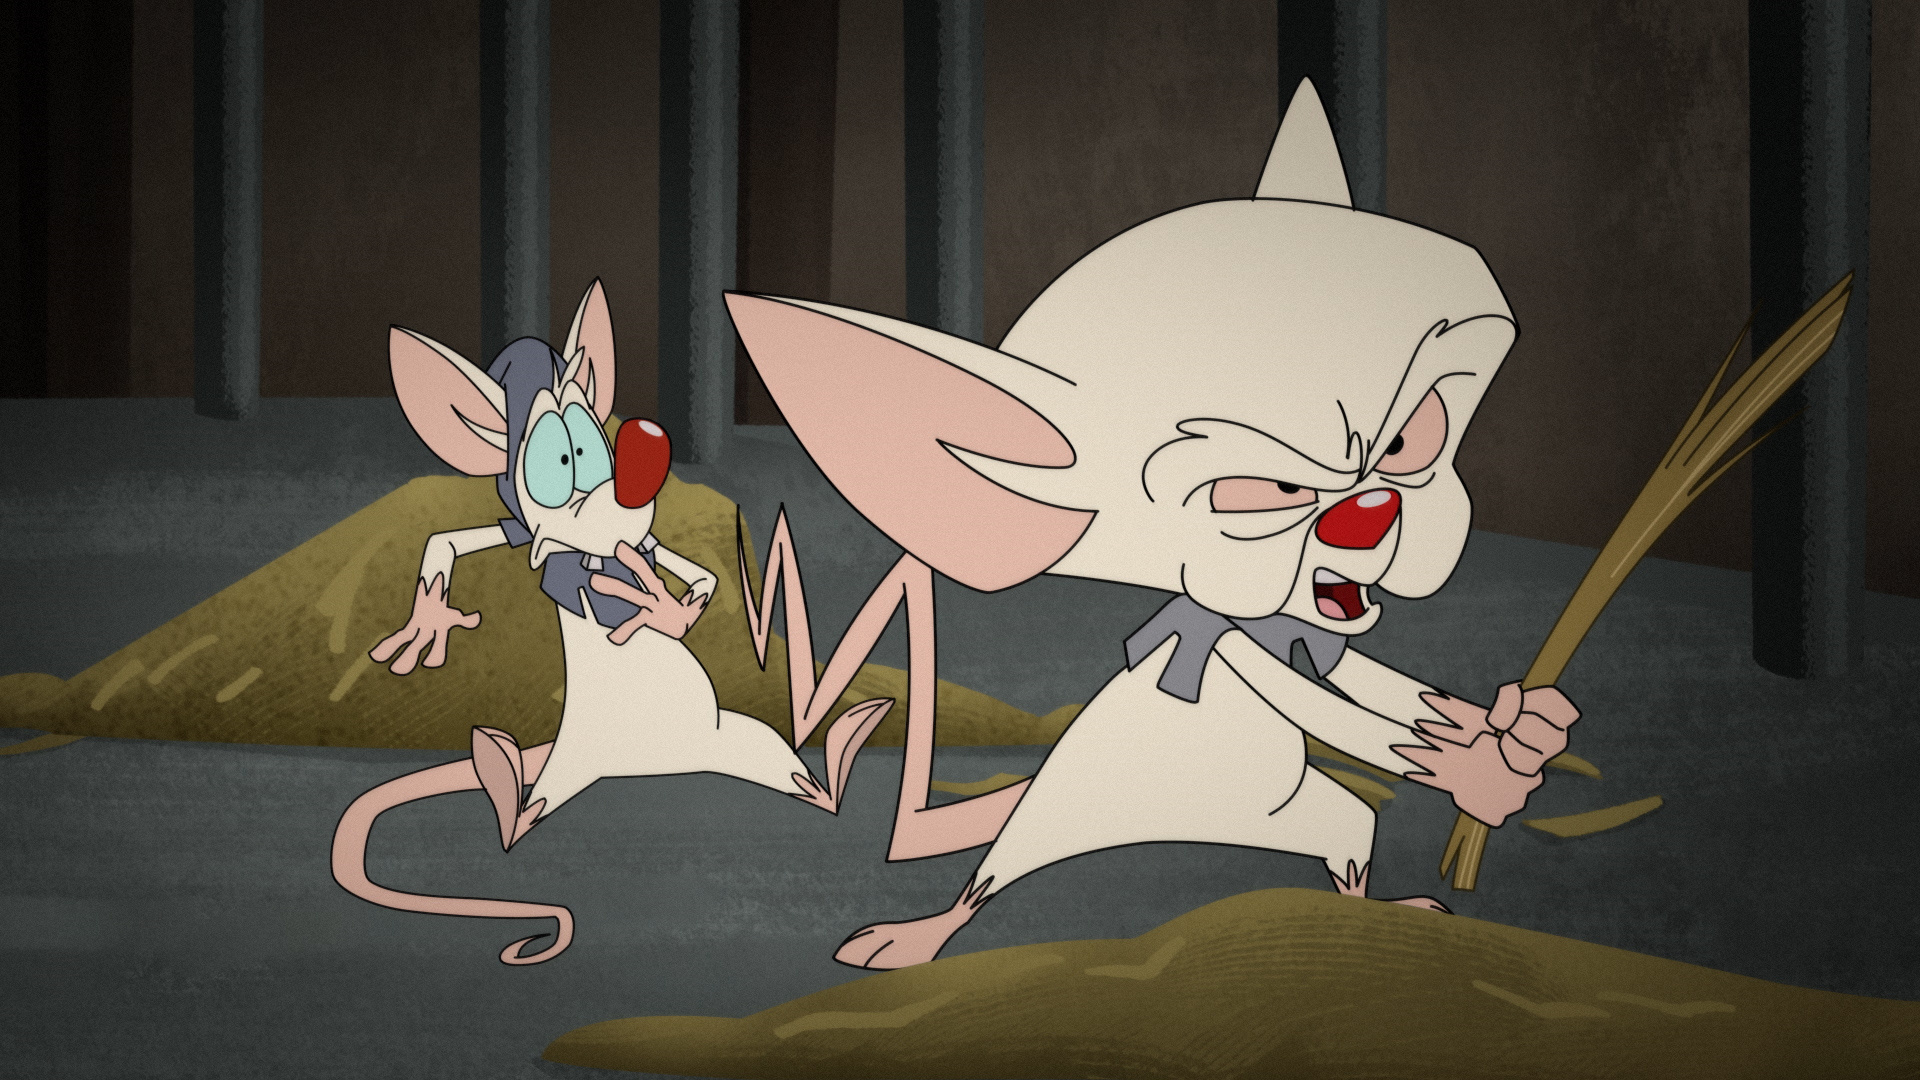 HD wallpaper, Character Analysis, Voices Behind Pinky And The Brain, Canadian Voice Actor, Maurice Lamarche, Desktop 1080P Pinky And The Brain Wallpaper, 1920X1080 Full Hd Desktop